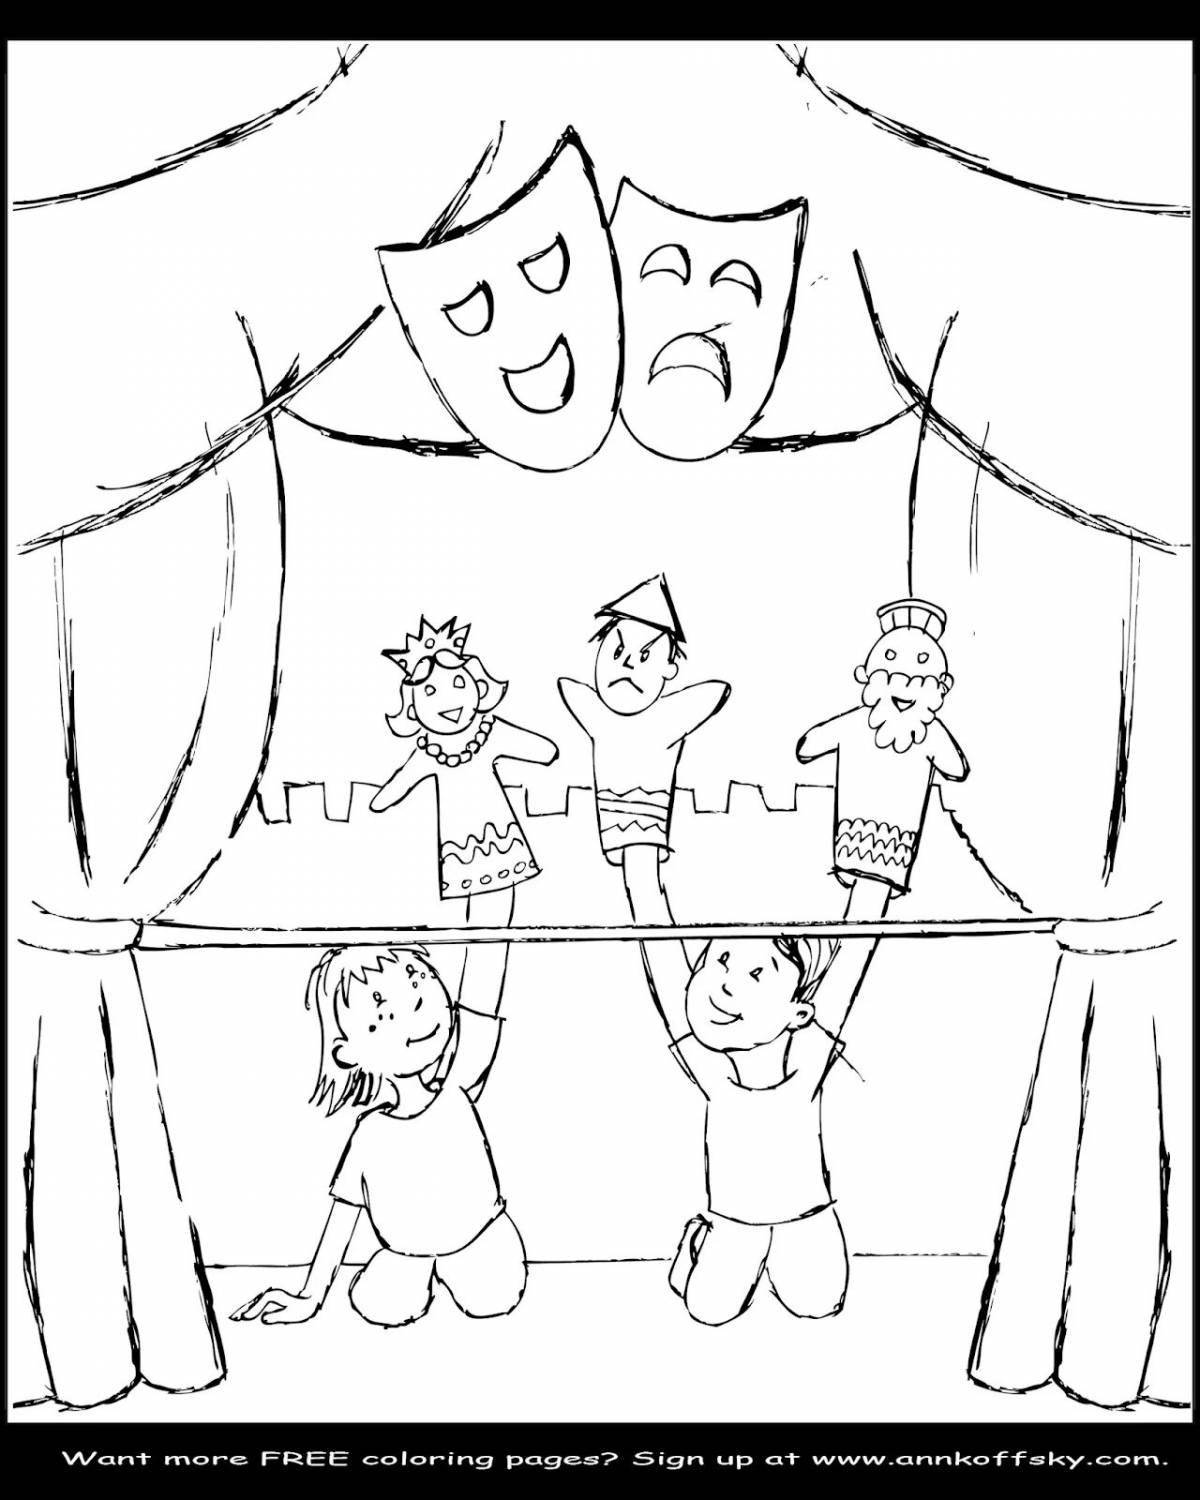 Colorful puppet theater coloring book